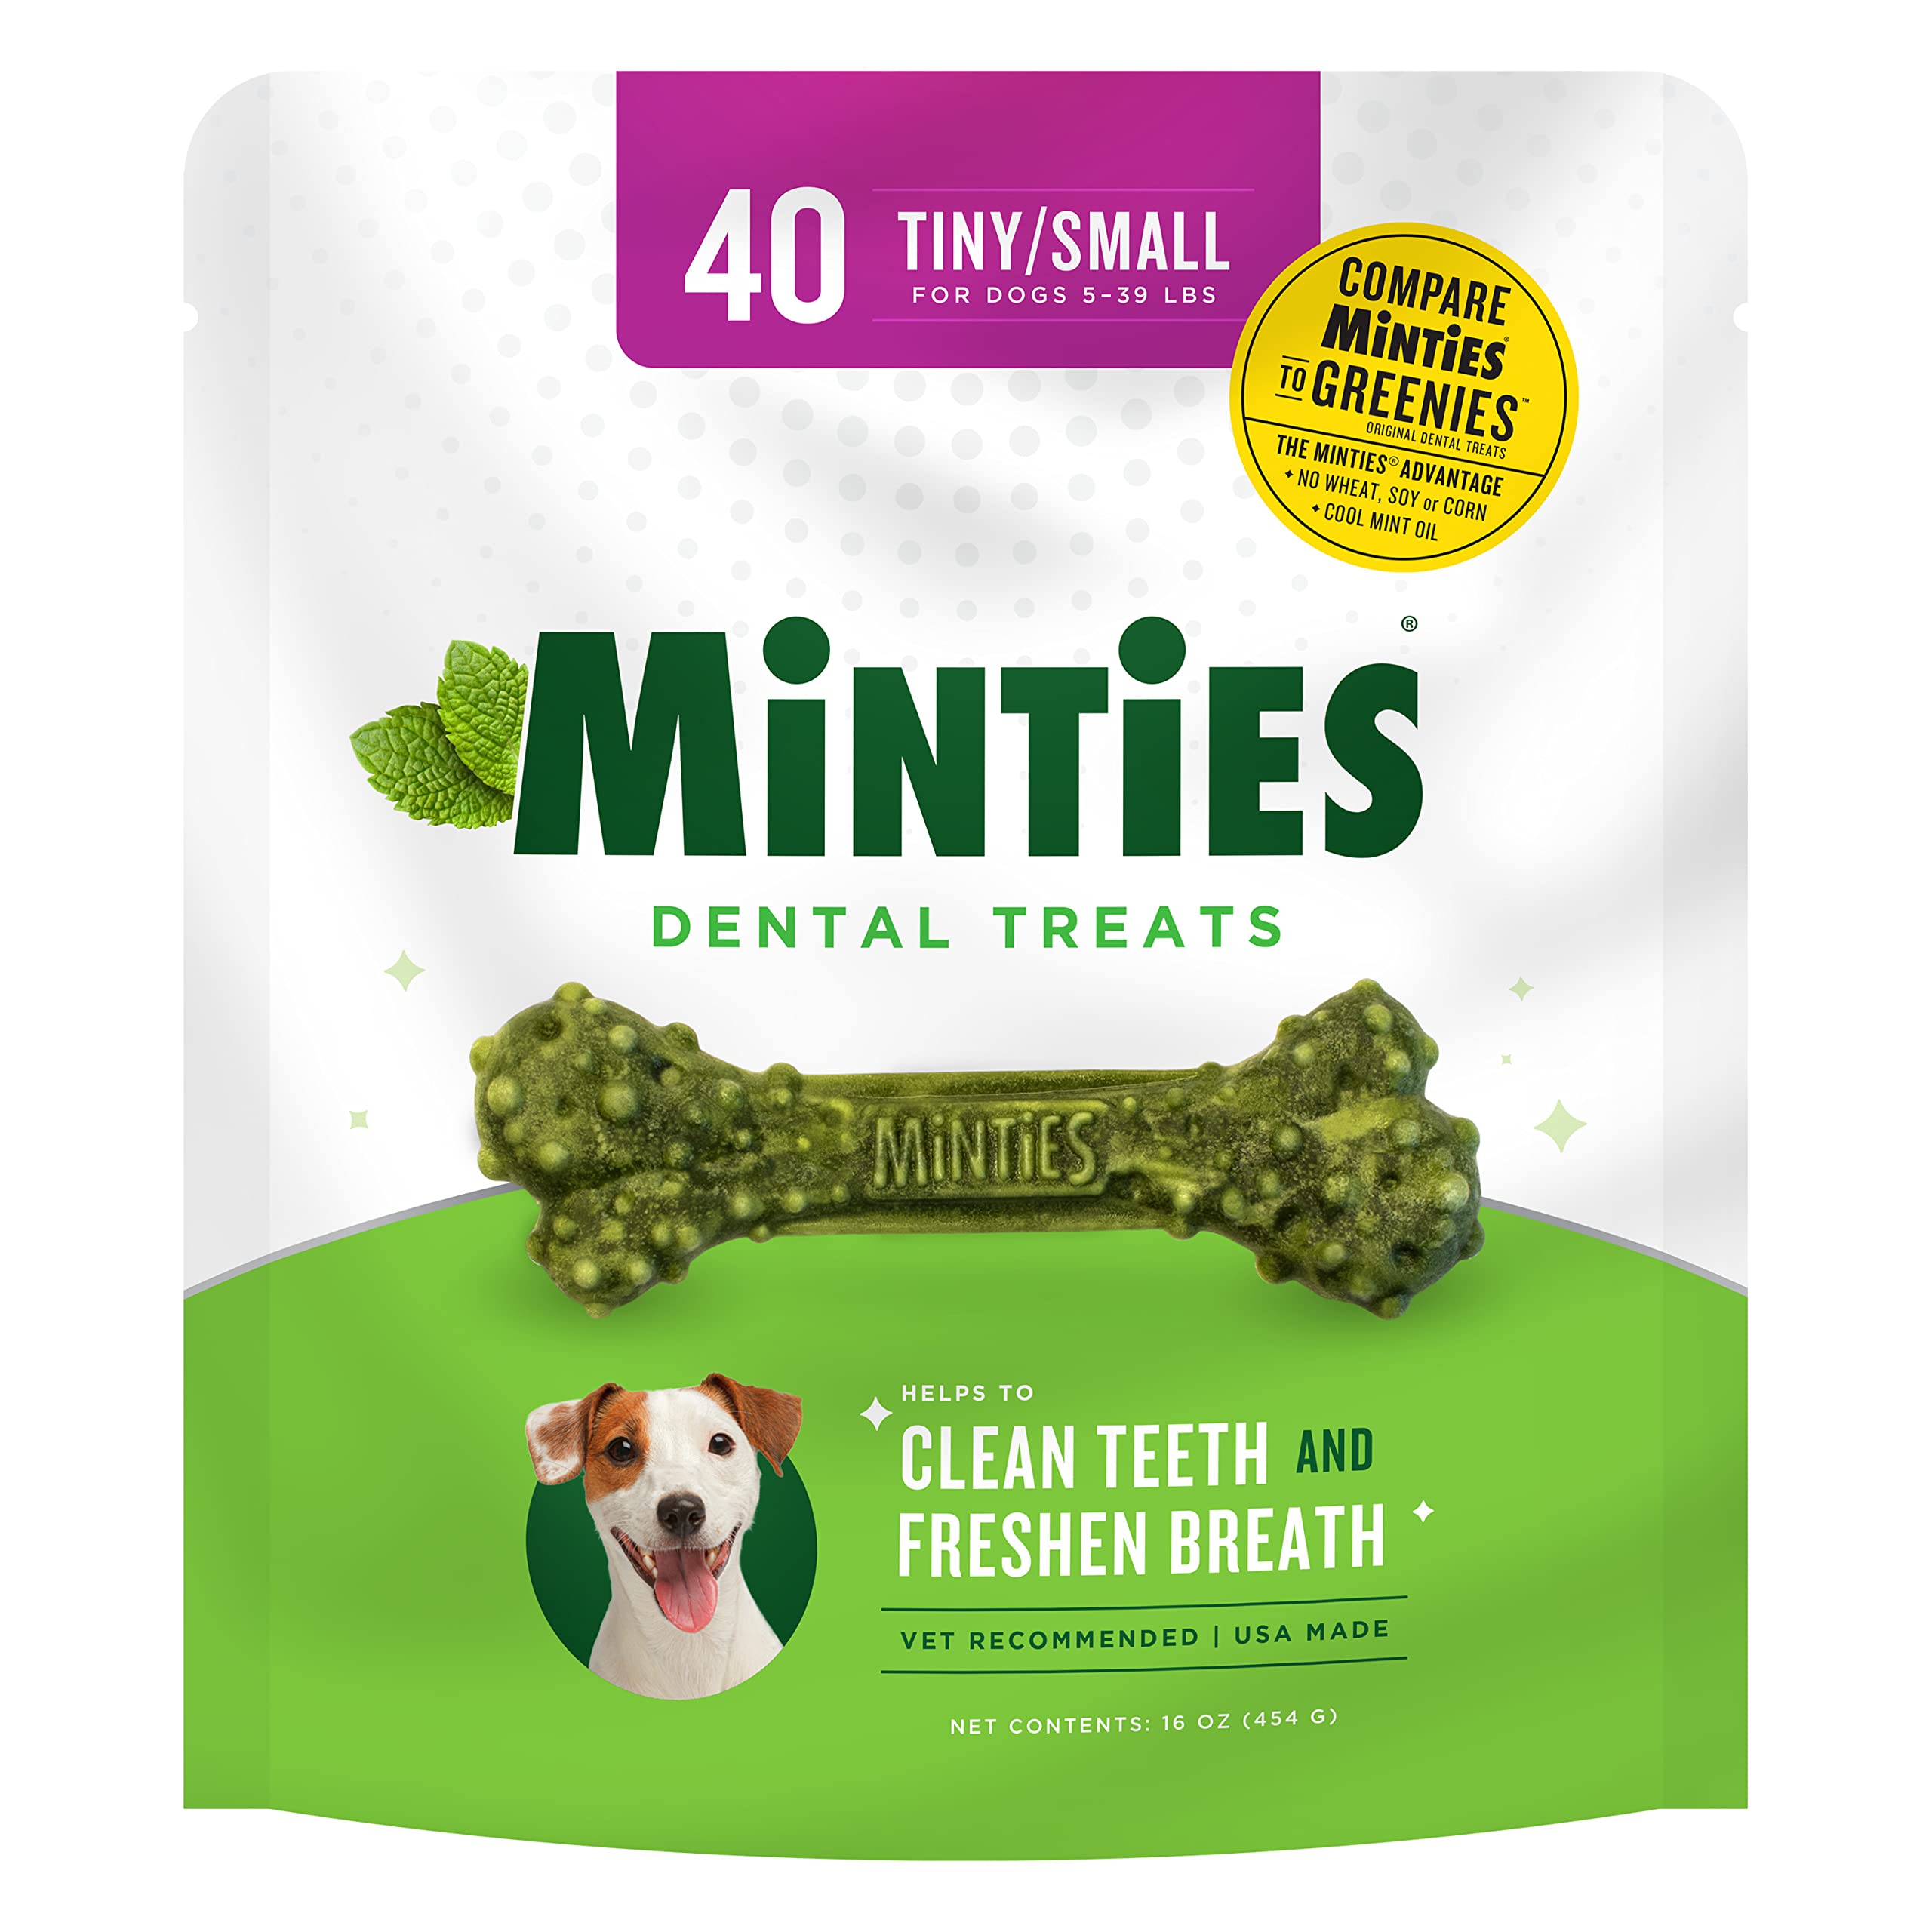 40-Count Minties VetIQ Dog Dental Bone Treats (Tiny/Small Dogs, under 40-lbs) $5.30 w/ S&S + Free Shipping w/ Prime or on $25+